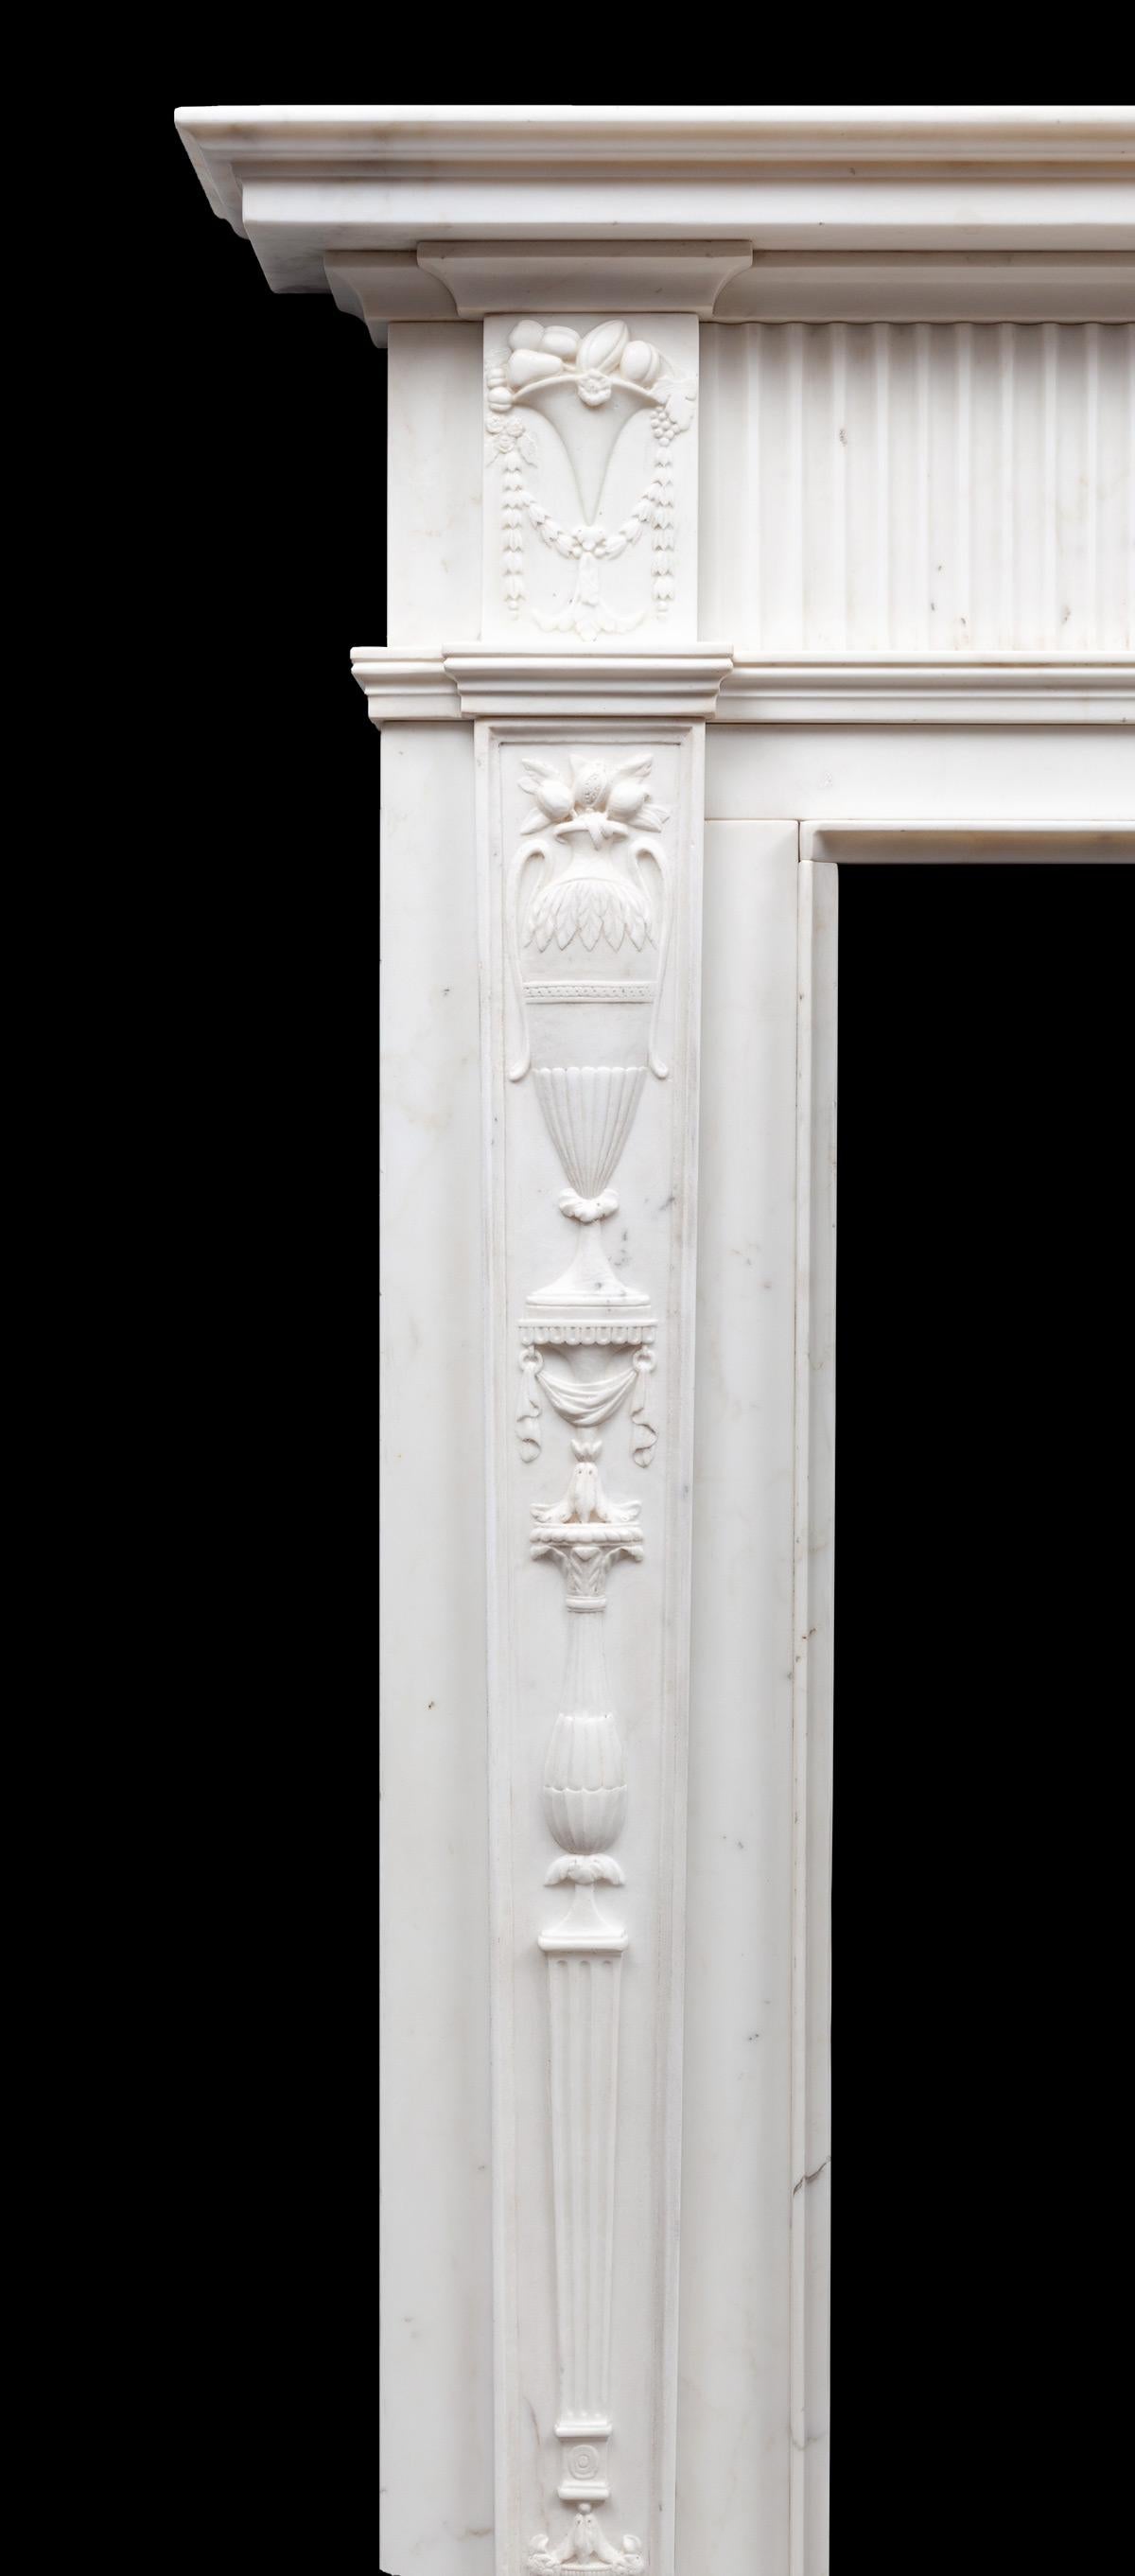 An outstanding and rare pair of Irish, late 18th century Statuary Carrara marble chimneypieces. The tall and elegant tapering pilasters are finely carved with neo-classical ornament, the classical urn centre tablet is flanked by fluted panels and